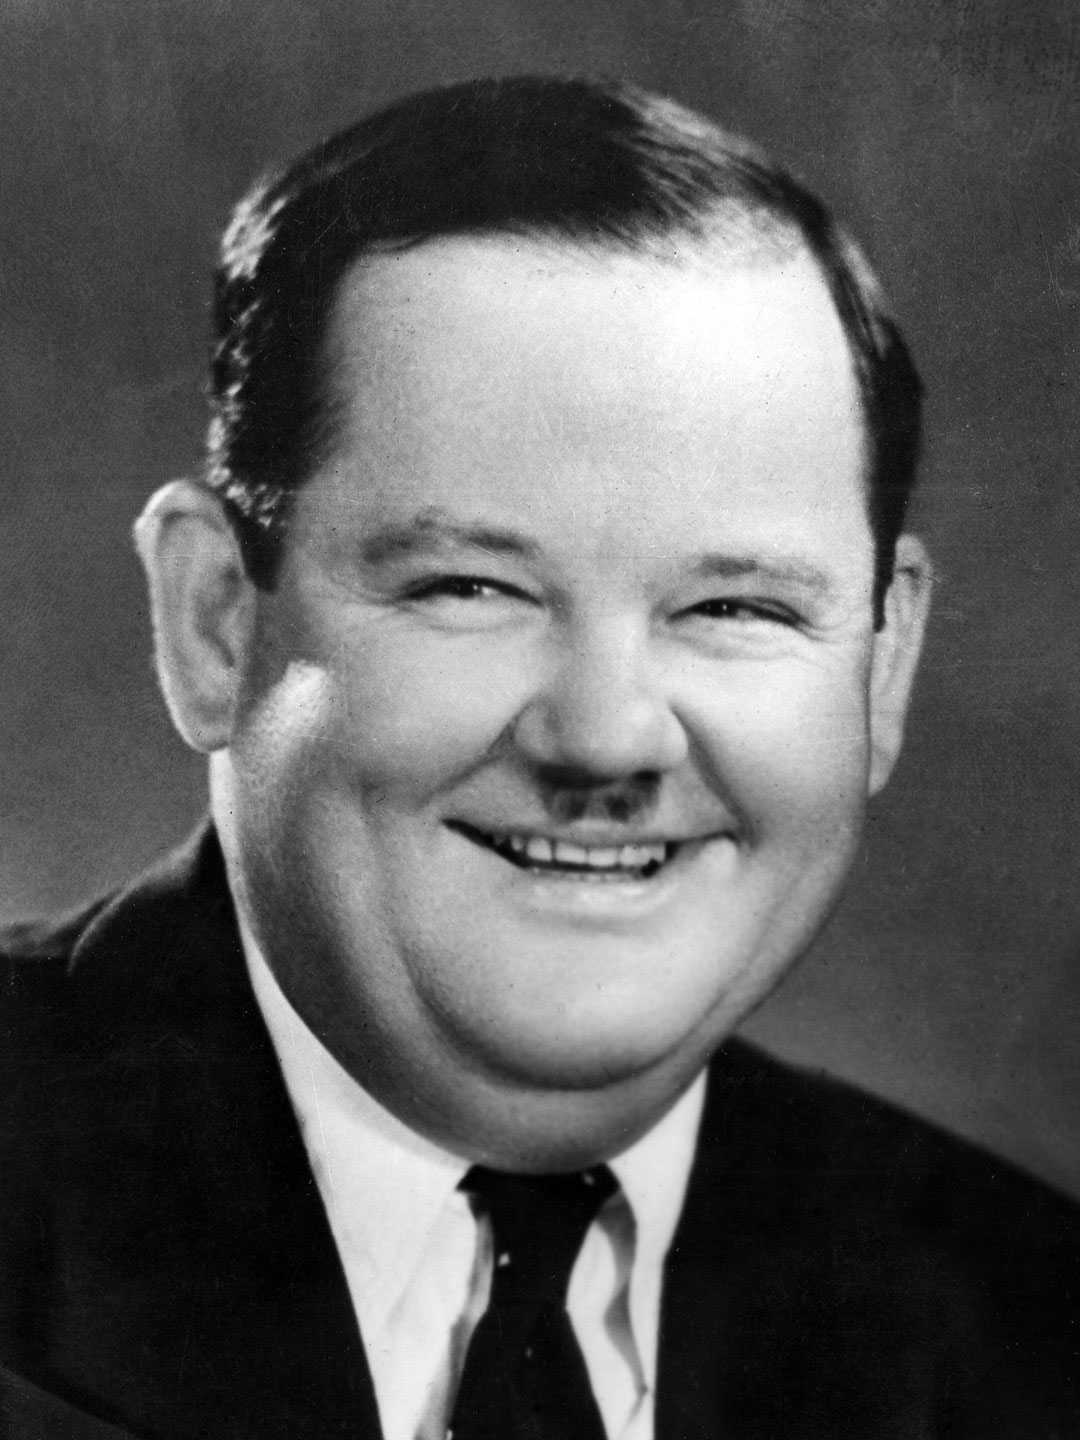 How tall is Oliver Hardy?